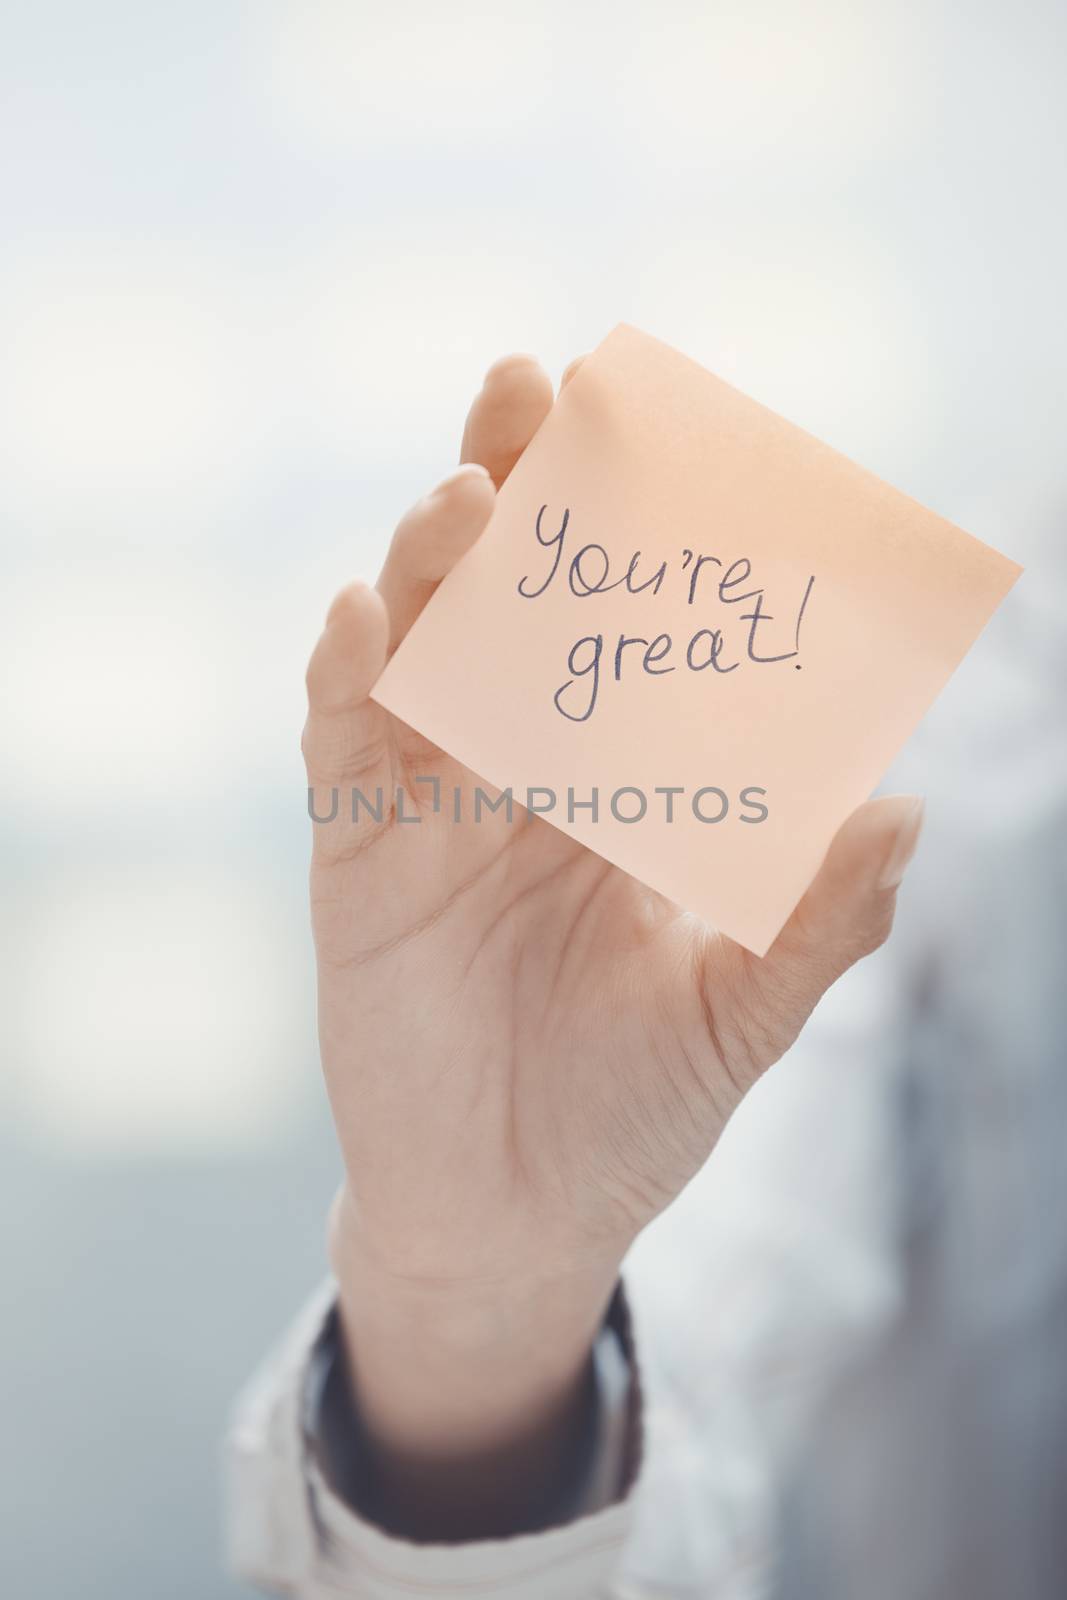 You are great by Novic